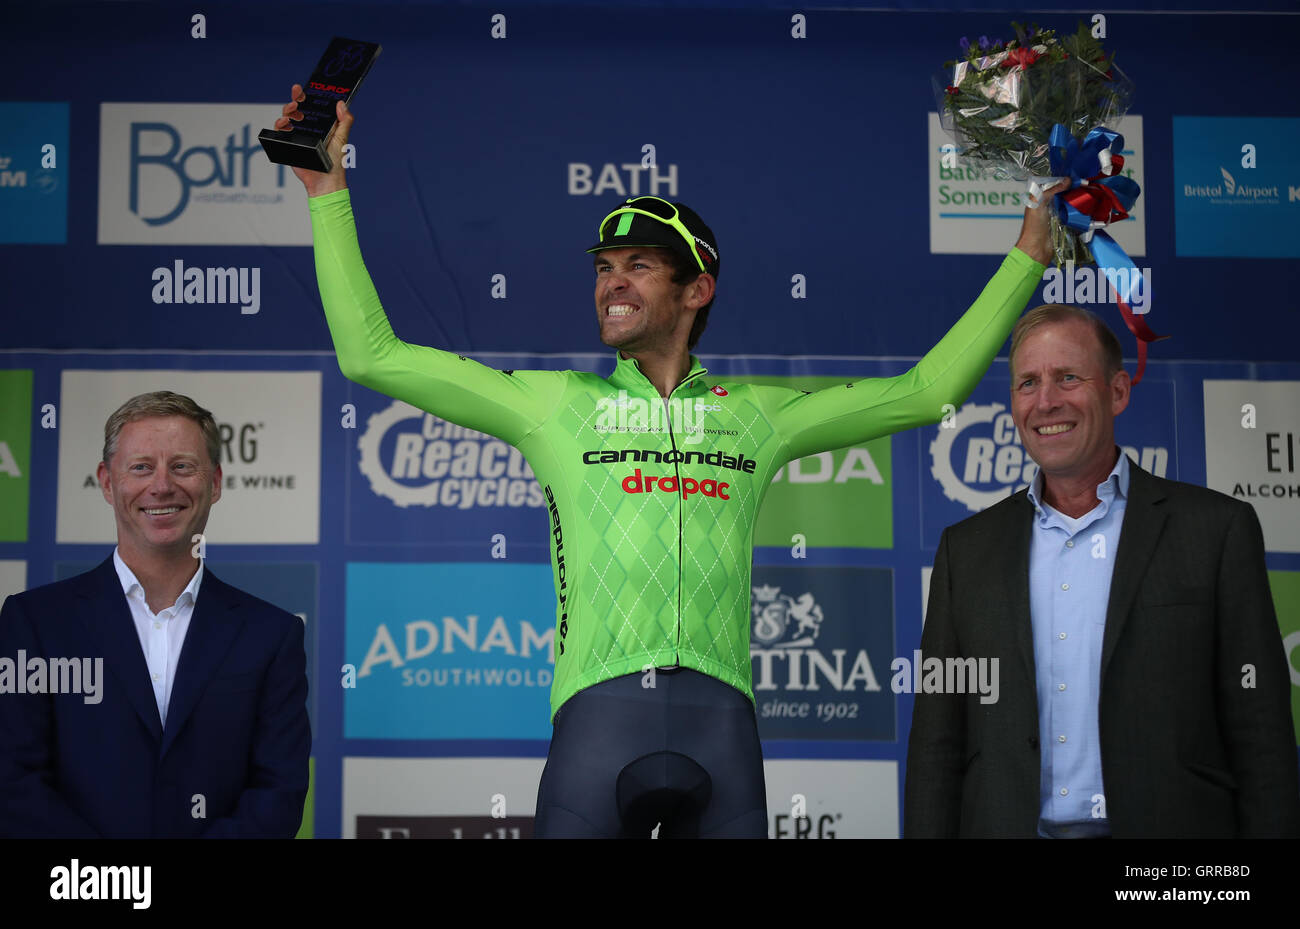 Cannondale-Drapac Jack Bauer celebrates following his stage five victory of the 2016 Tour of Britain between Aberdare and Bath. Stock Photo